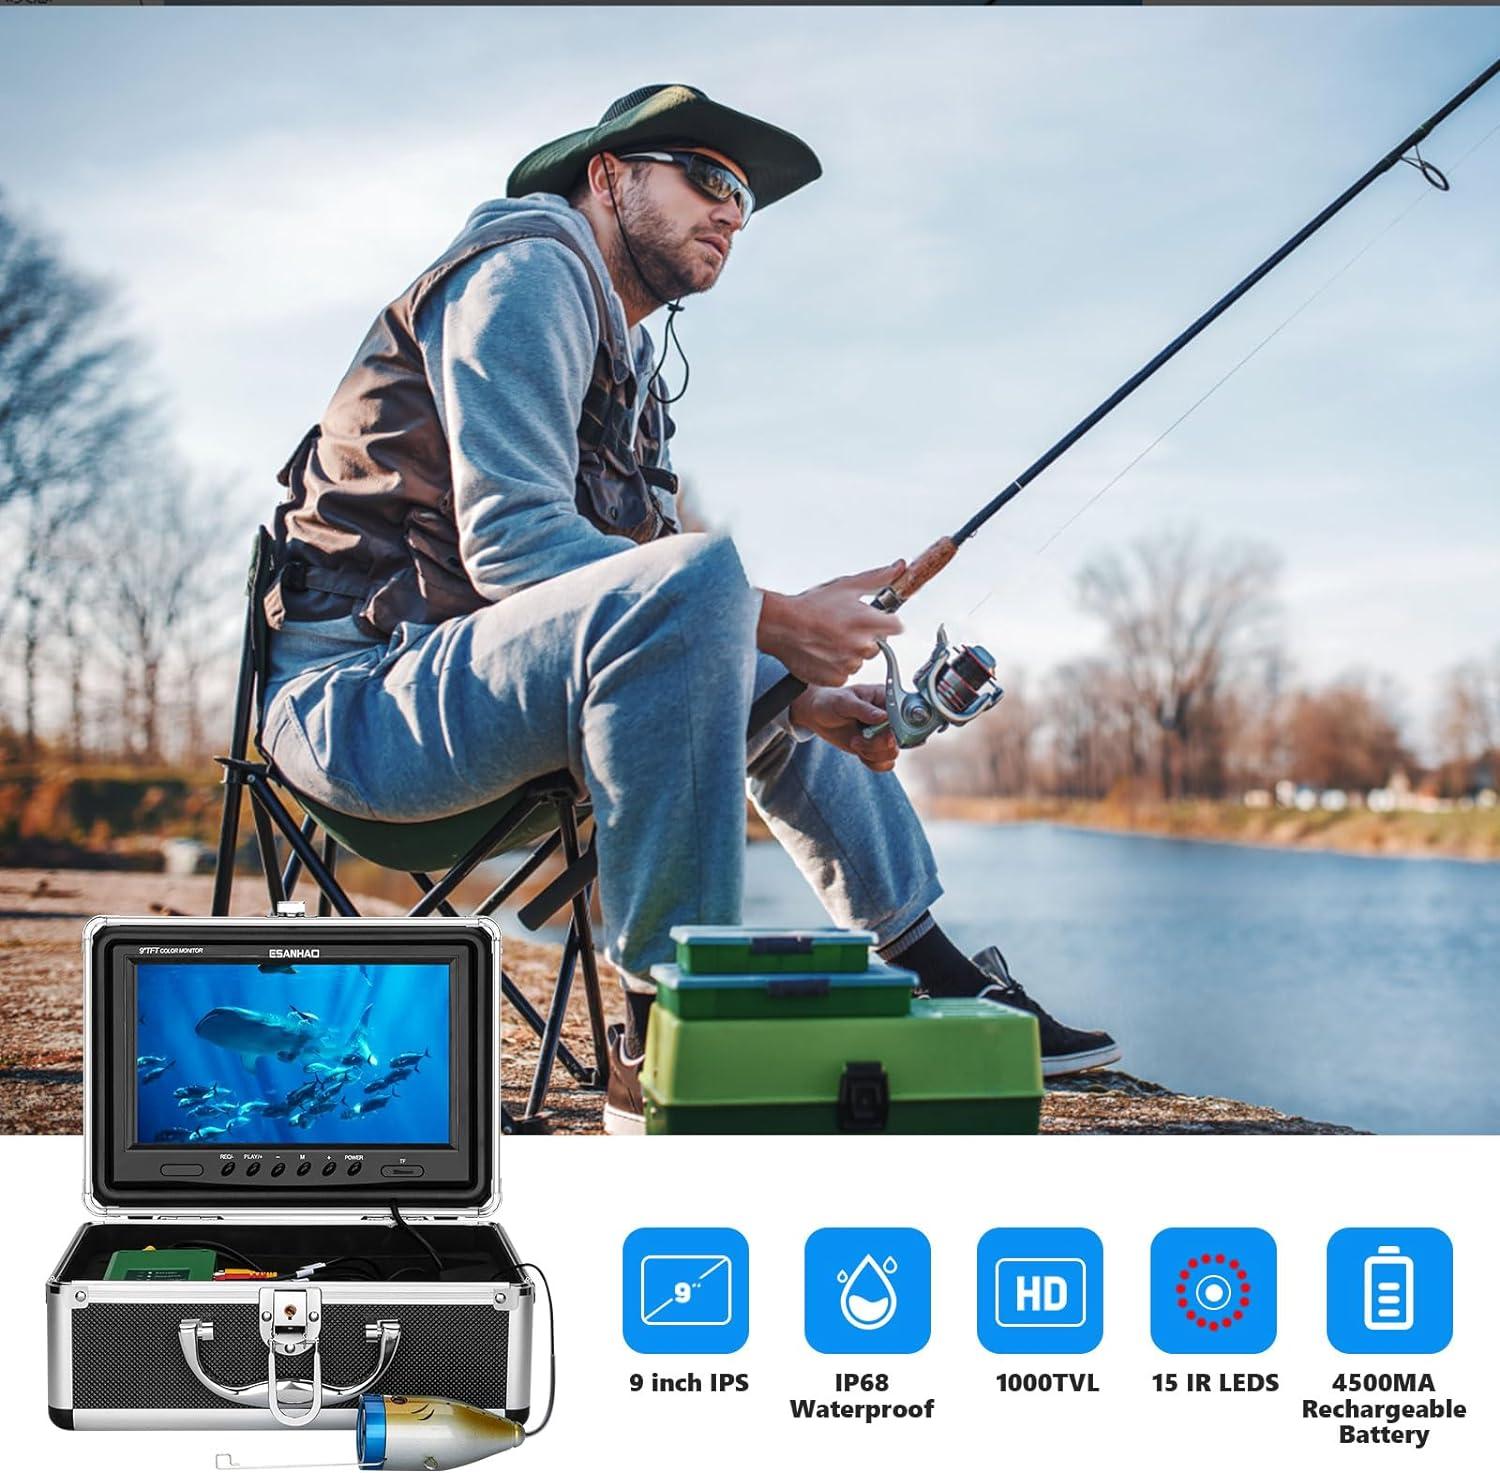 ESANHAO Underwater Viewer Fishing Camera 9 inch LCD Monitor DVR Recorder  Video Fish Finder Camera Waterproof 1000TVL 98ft 15Pcs White LEDs and 15Pcs  Infrared Lamp for Ice/Sea/River Fishing